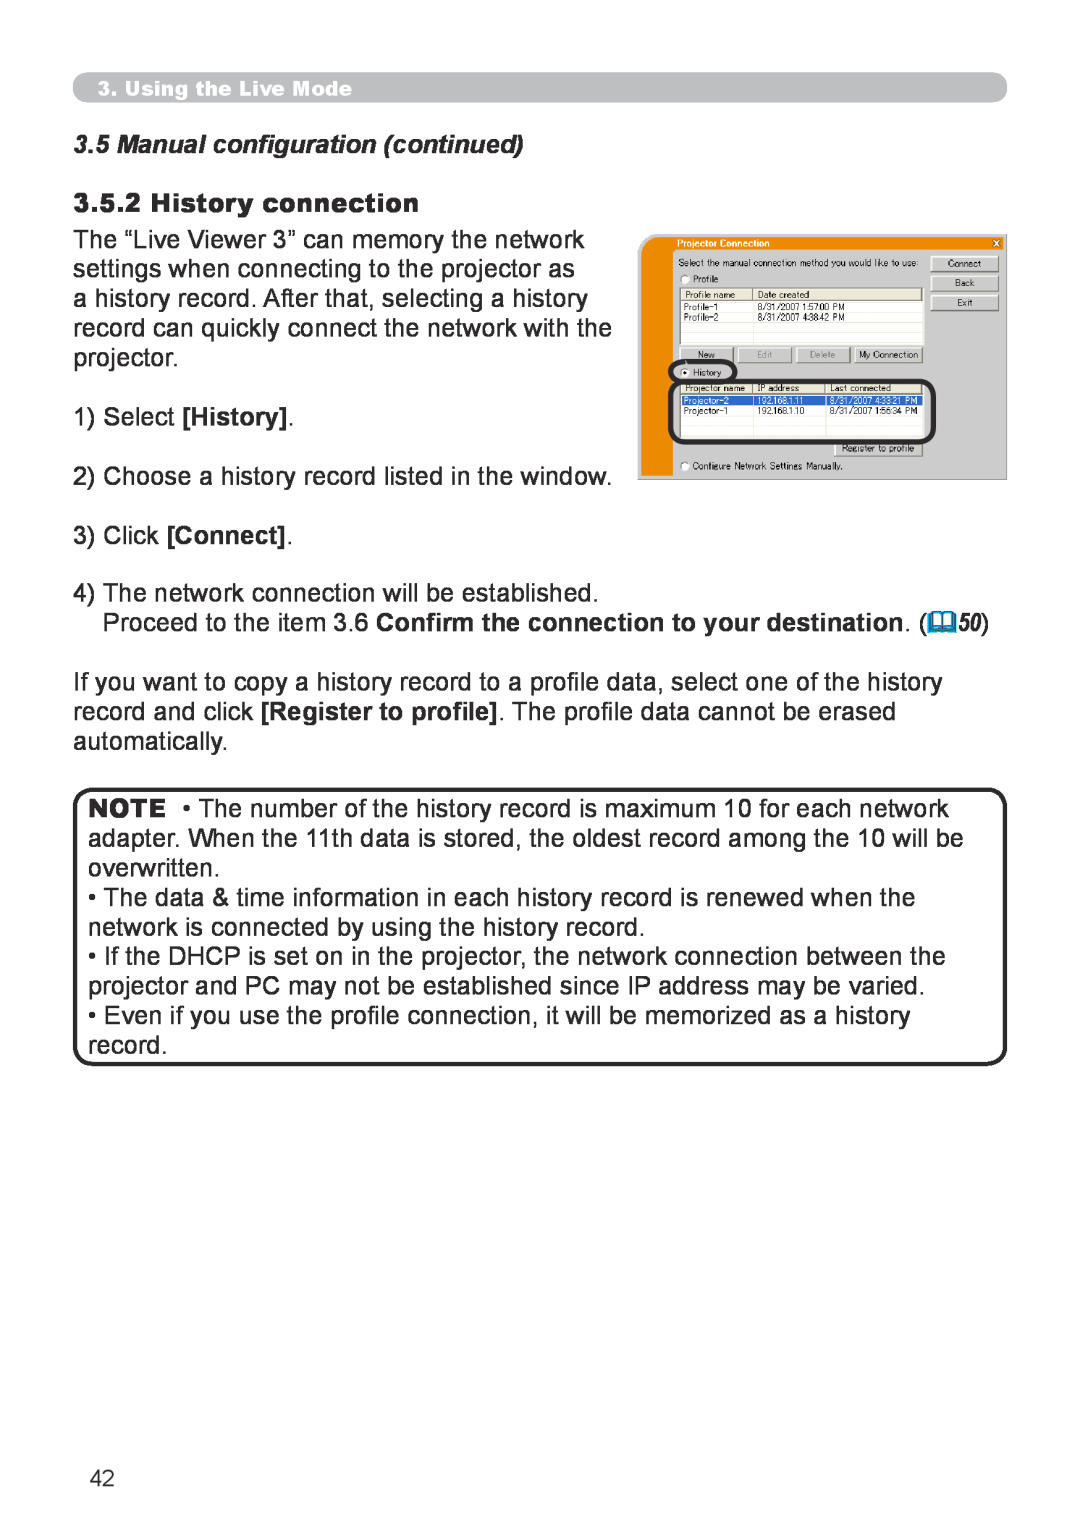 Hitachi CP-X267 user manual 3.5Manual configuration continued, History connection, 3Click Connect 